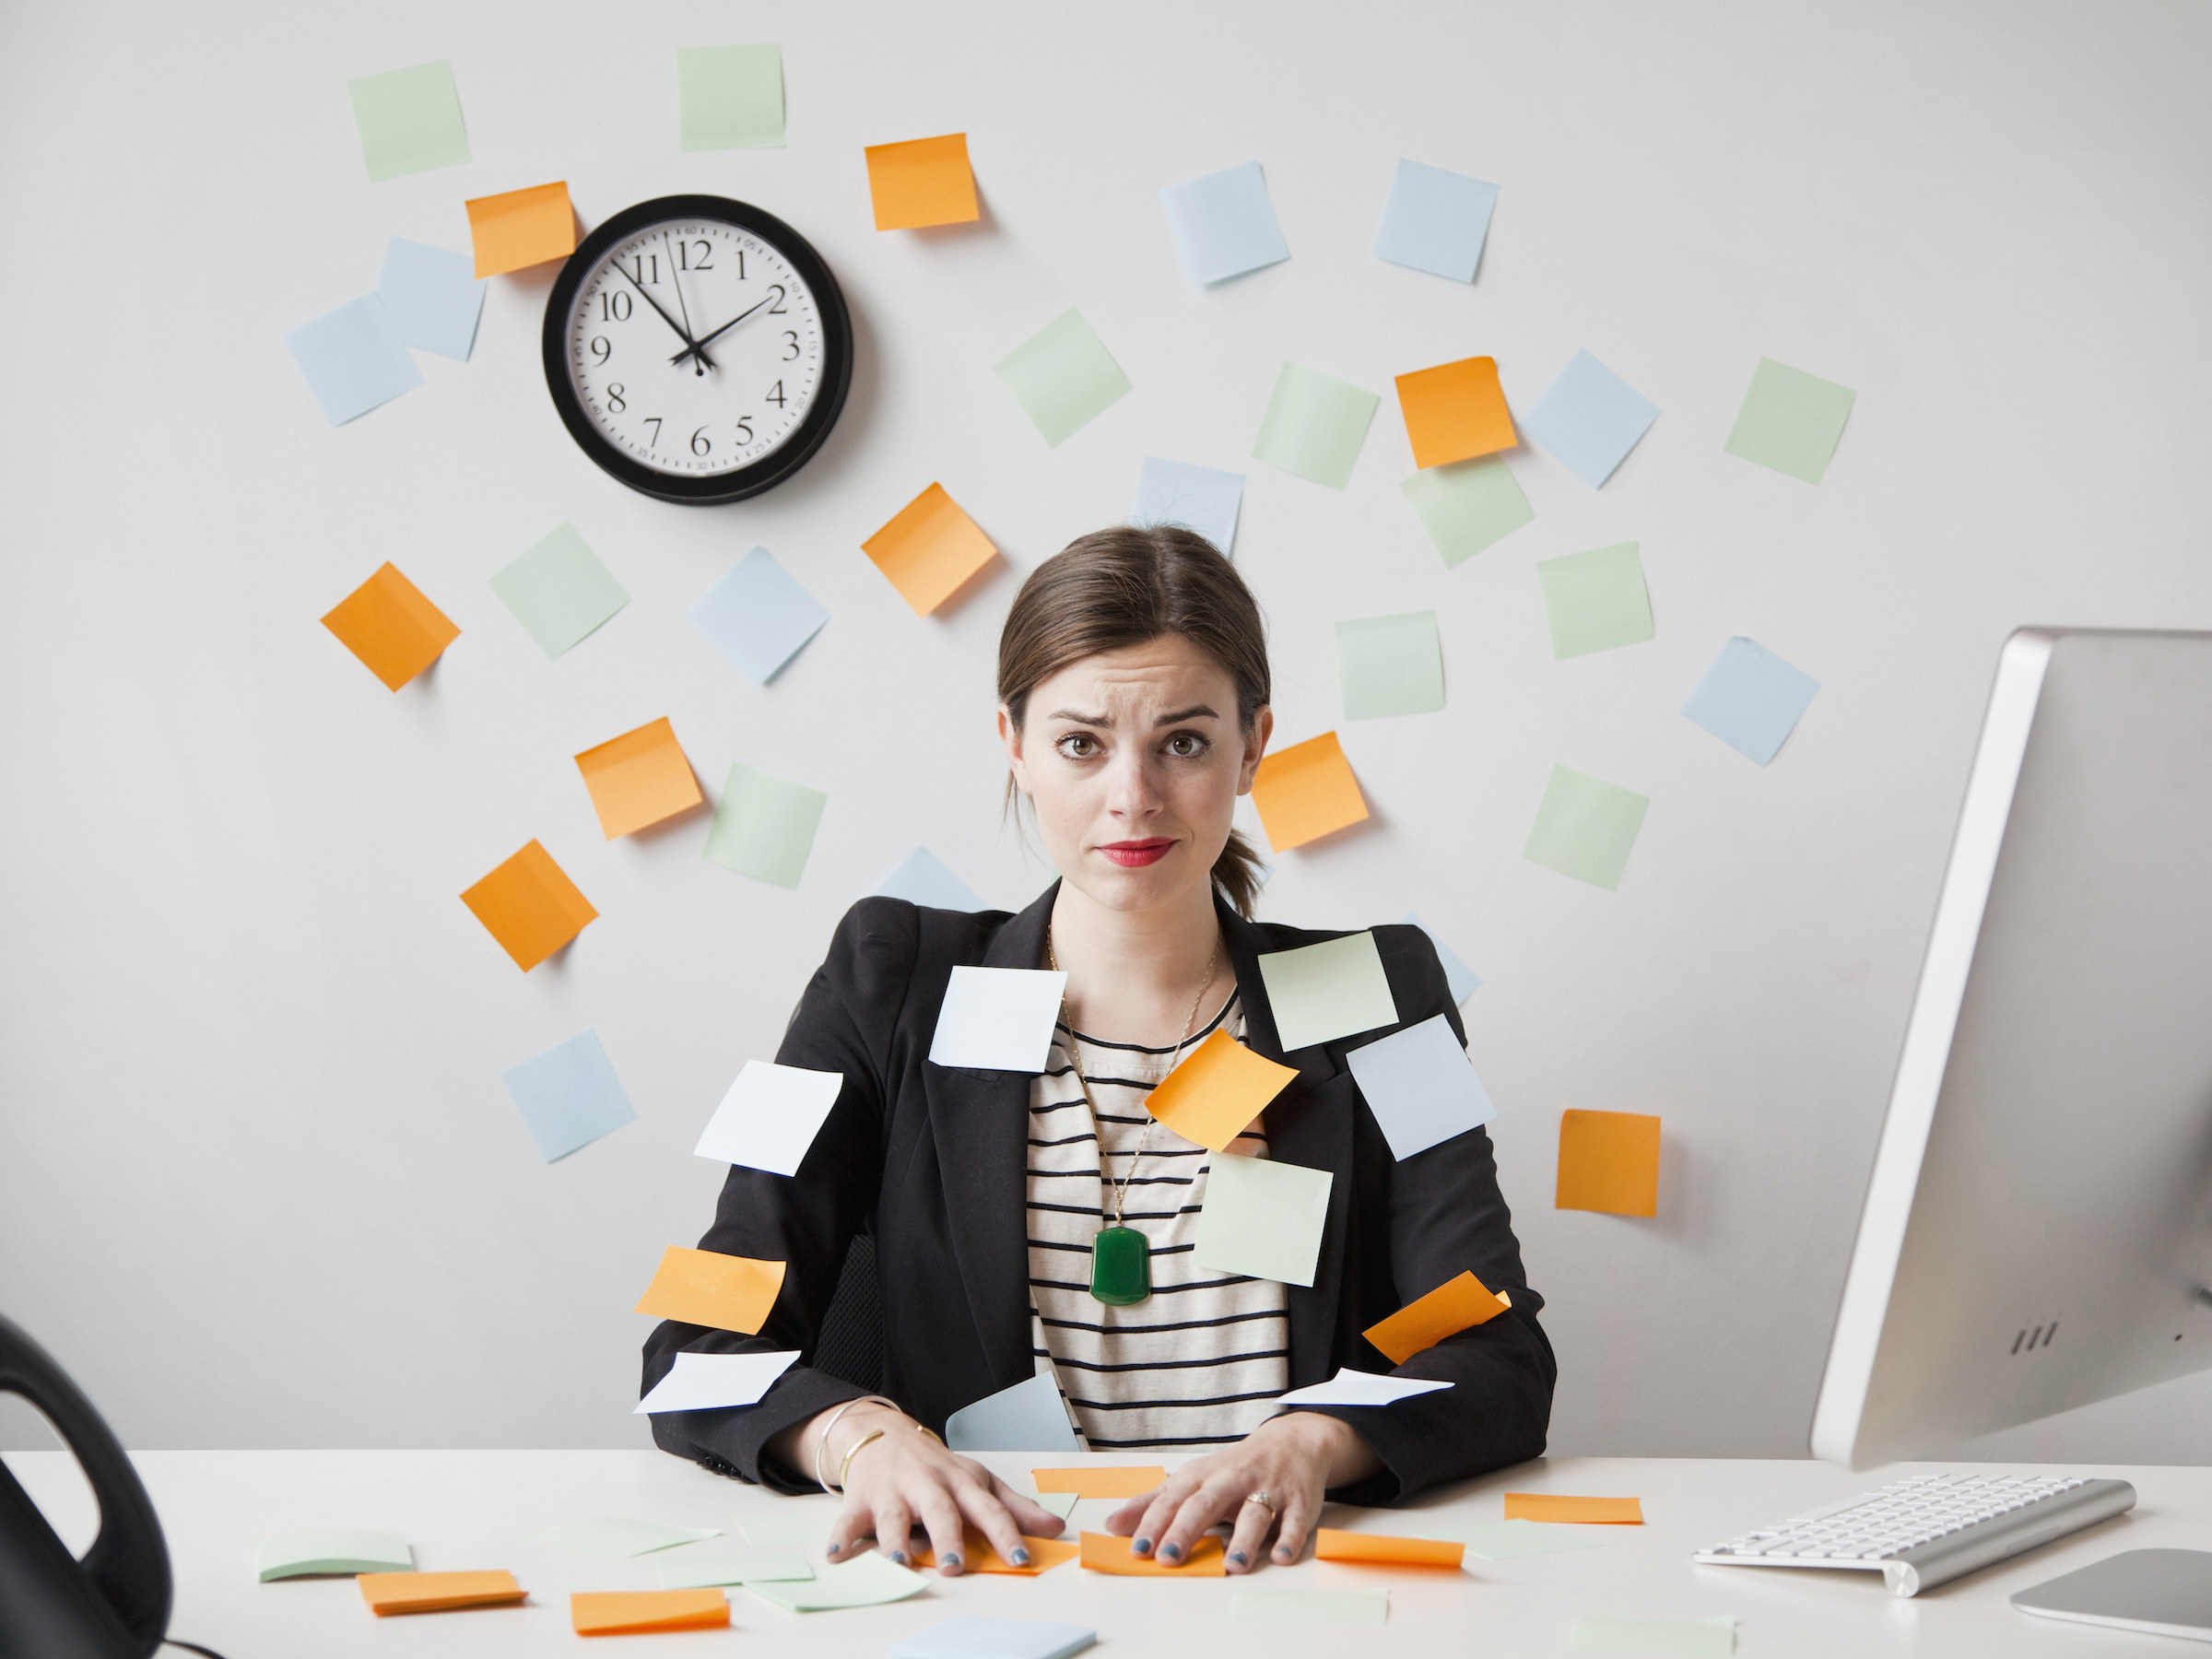 A woman at a desk with Post-its flying in the air and a clock behind her